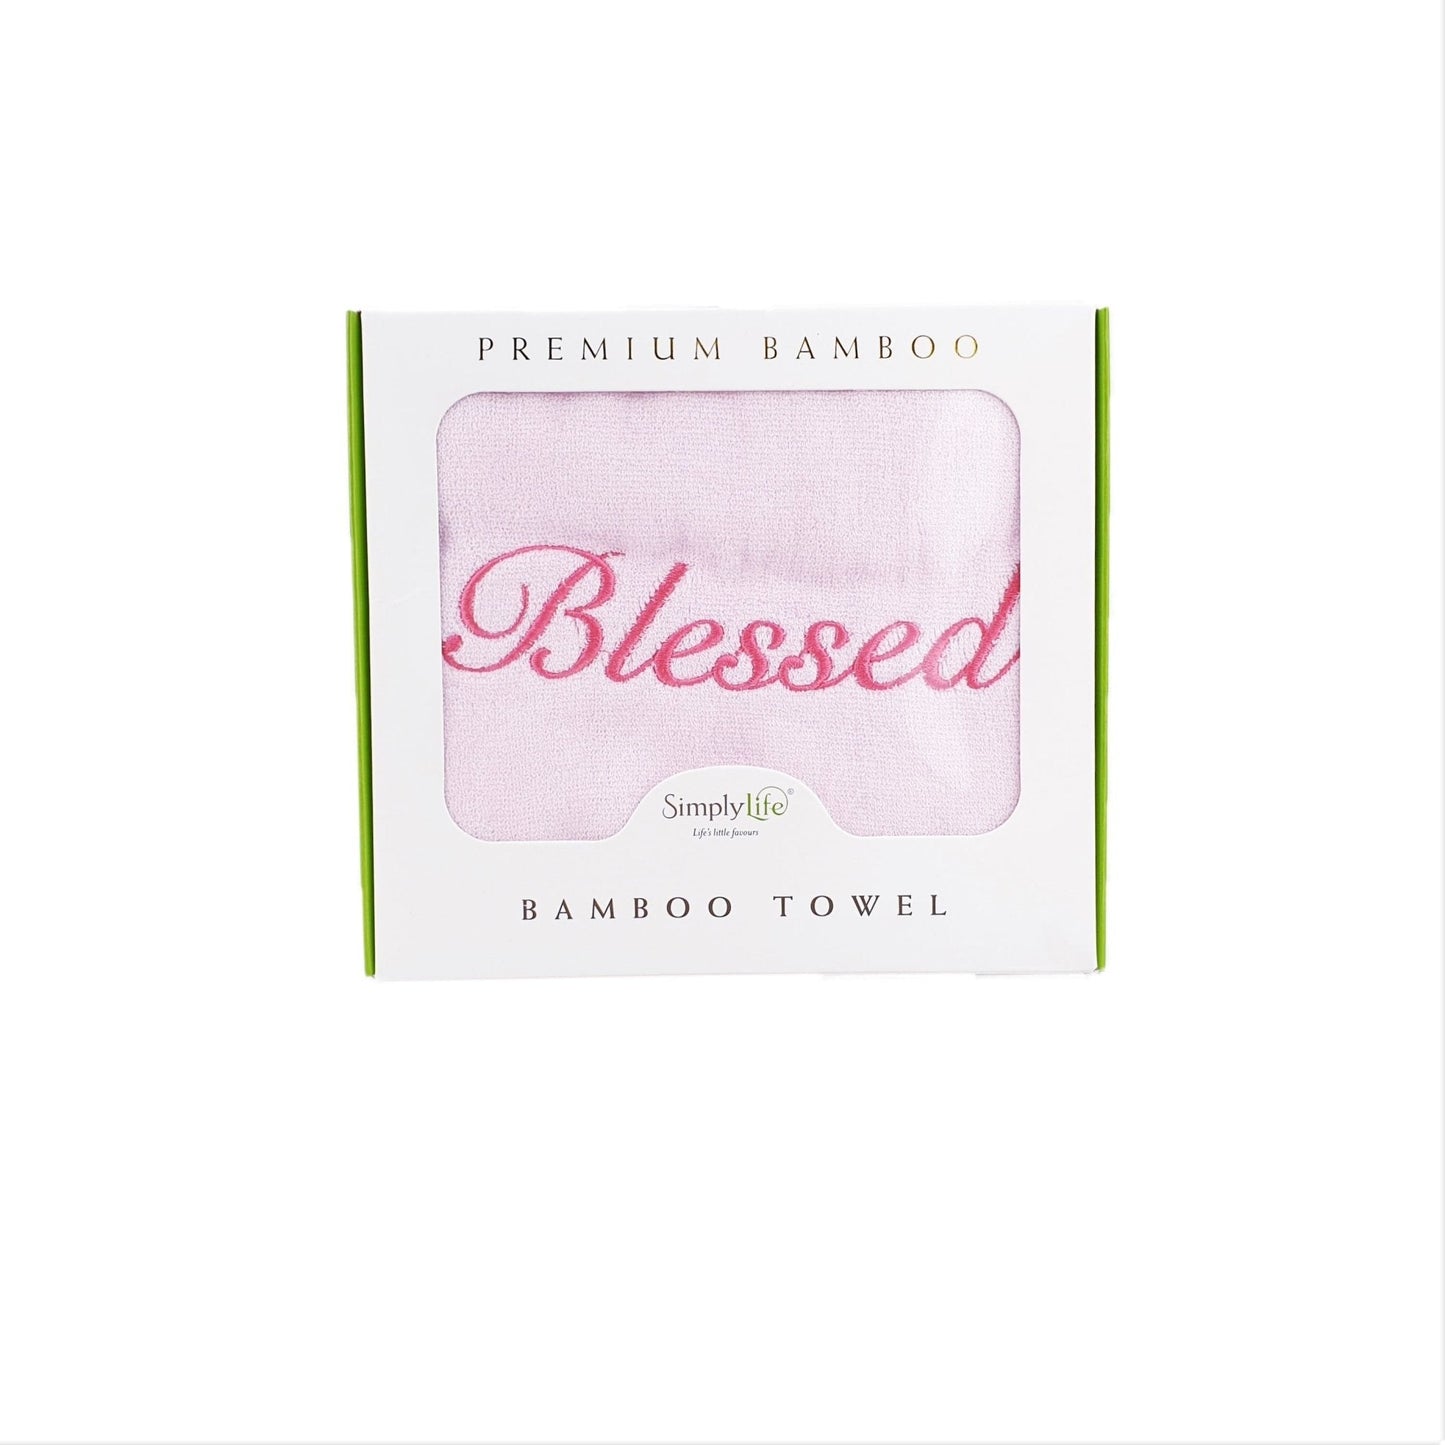 Blessed - Embroidered Premium Bamboo Towel (120x60 cm)